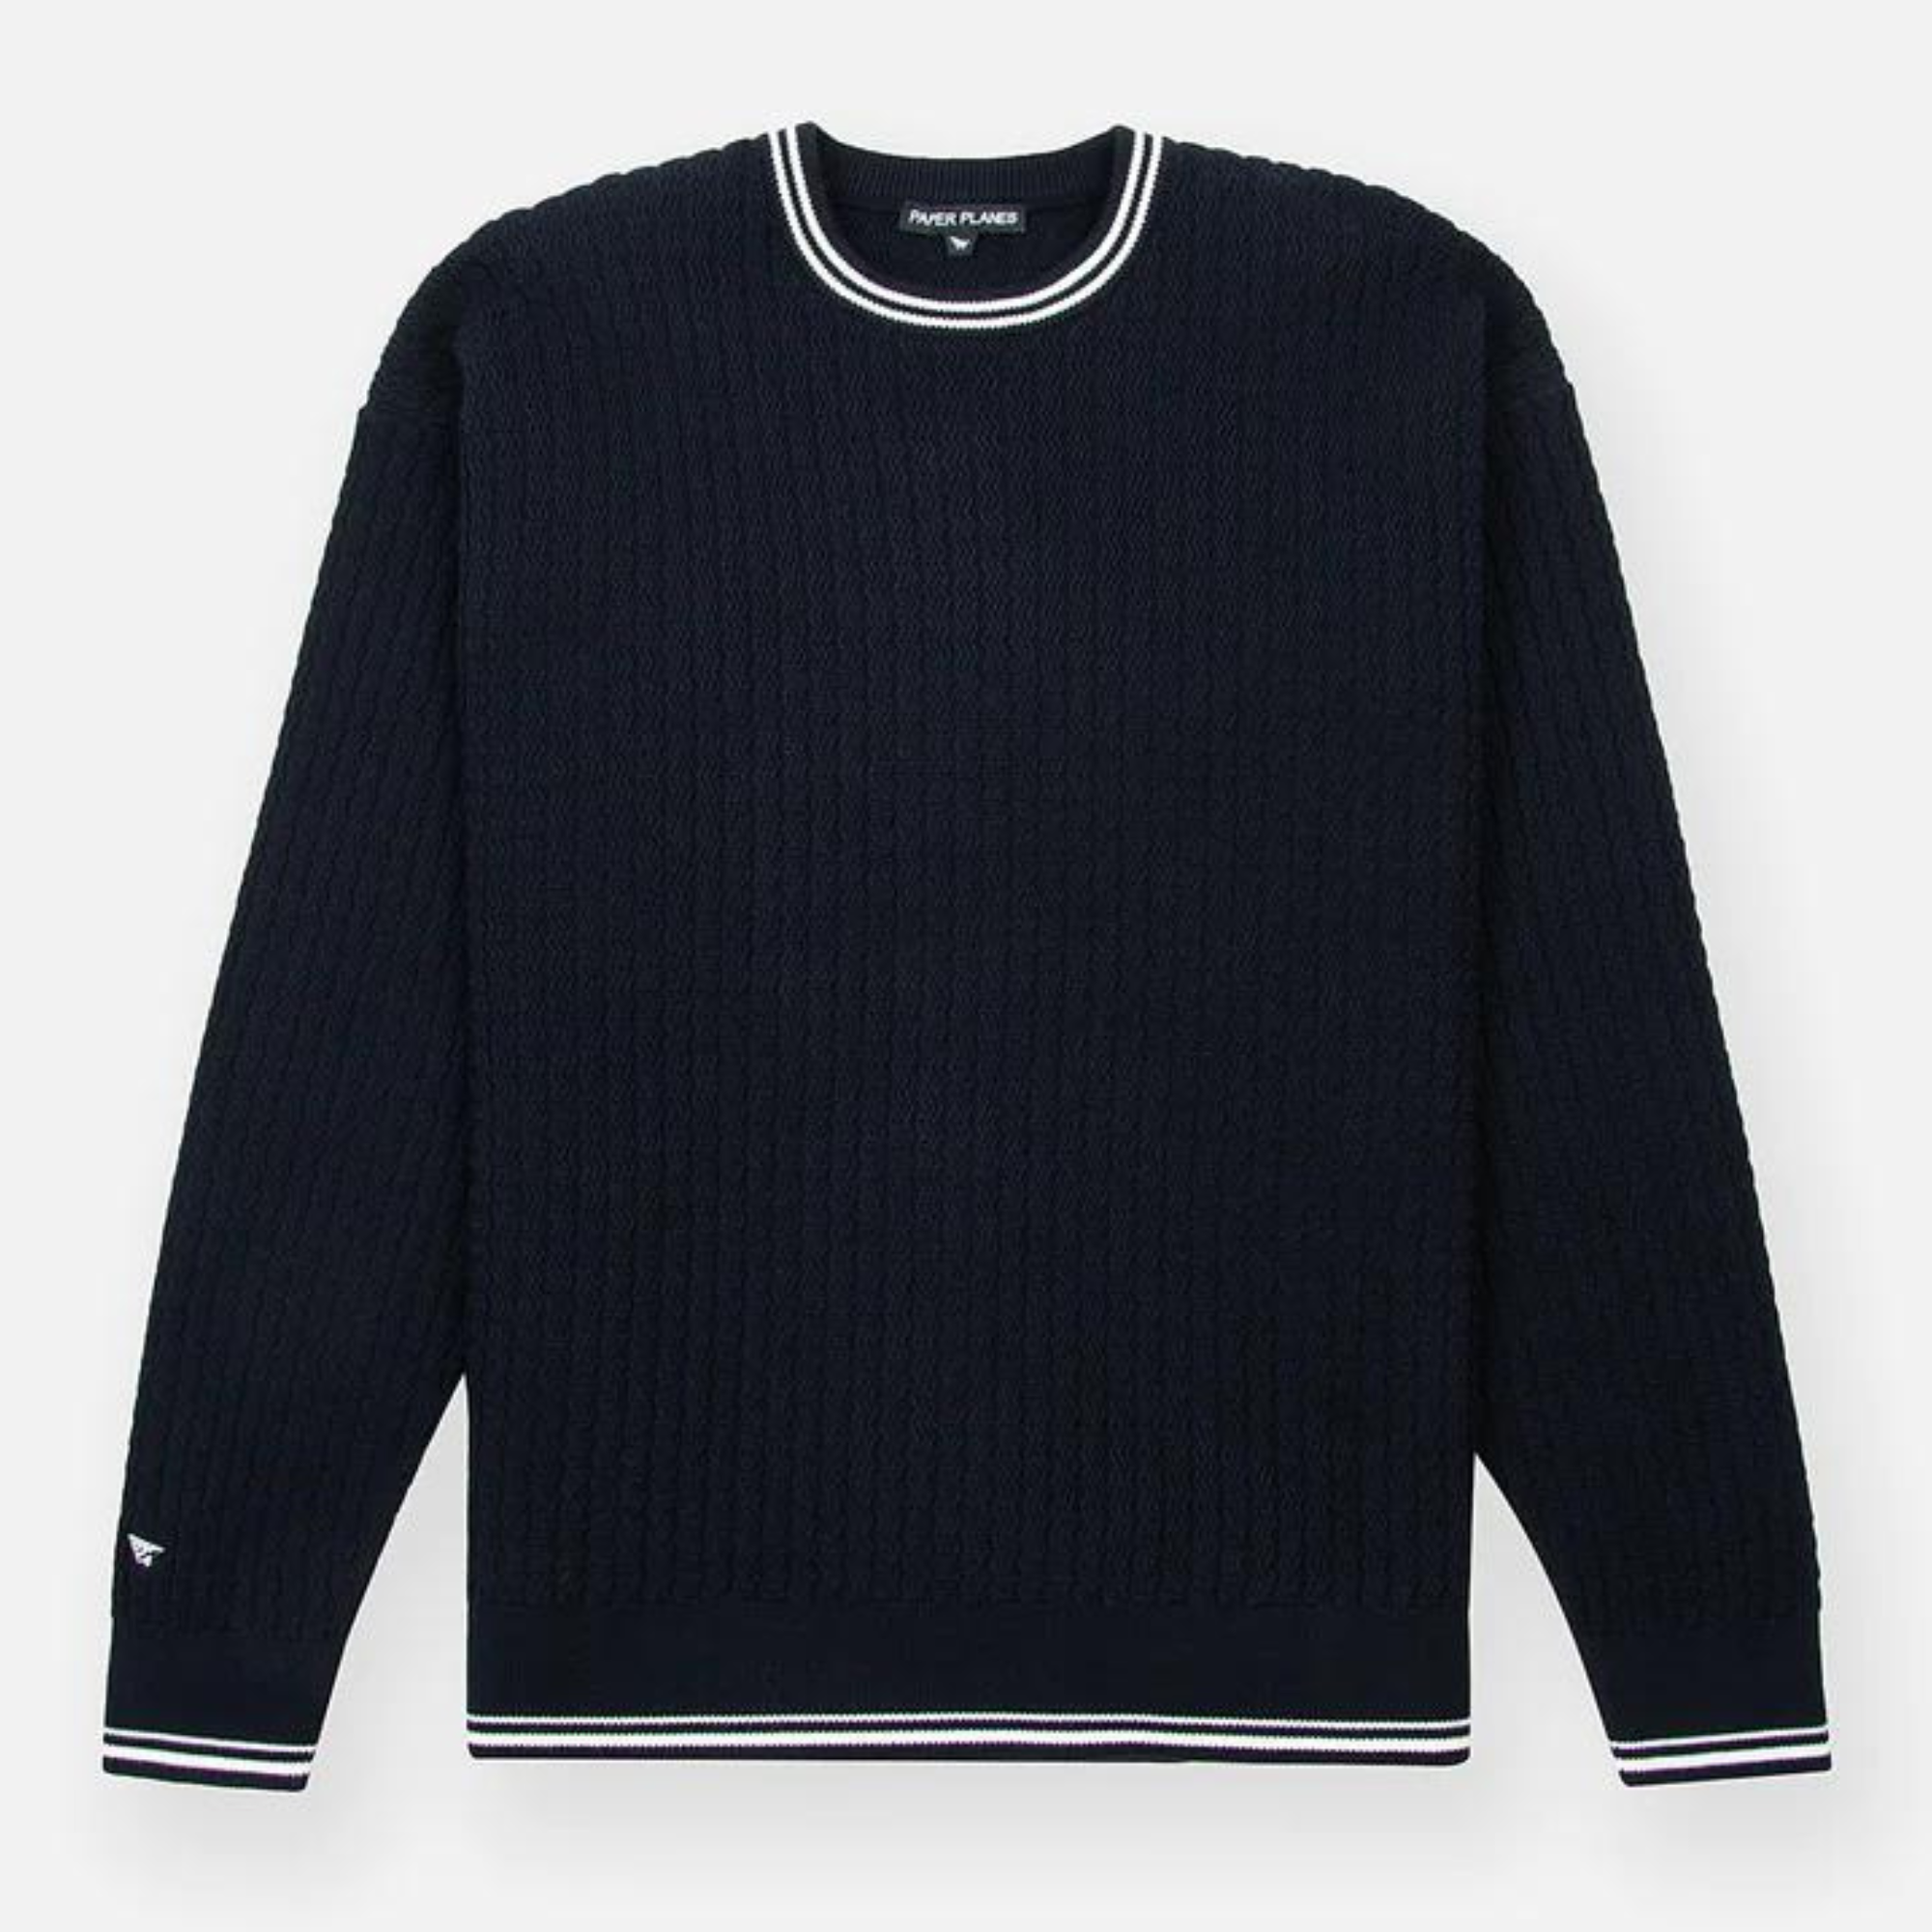 Paper Planes Racked Ribbed Sweater